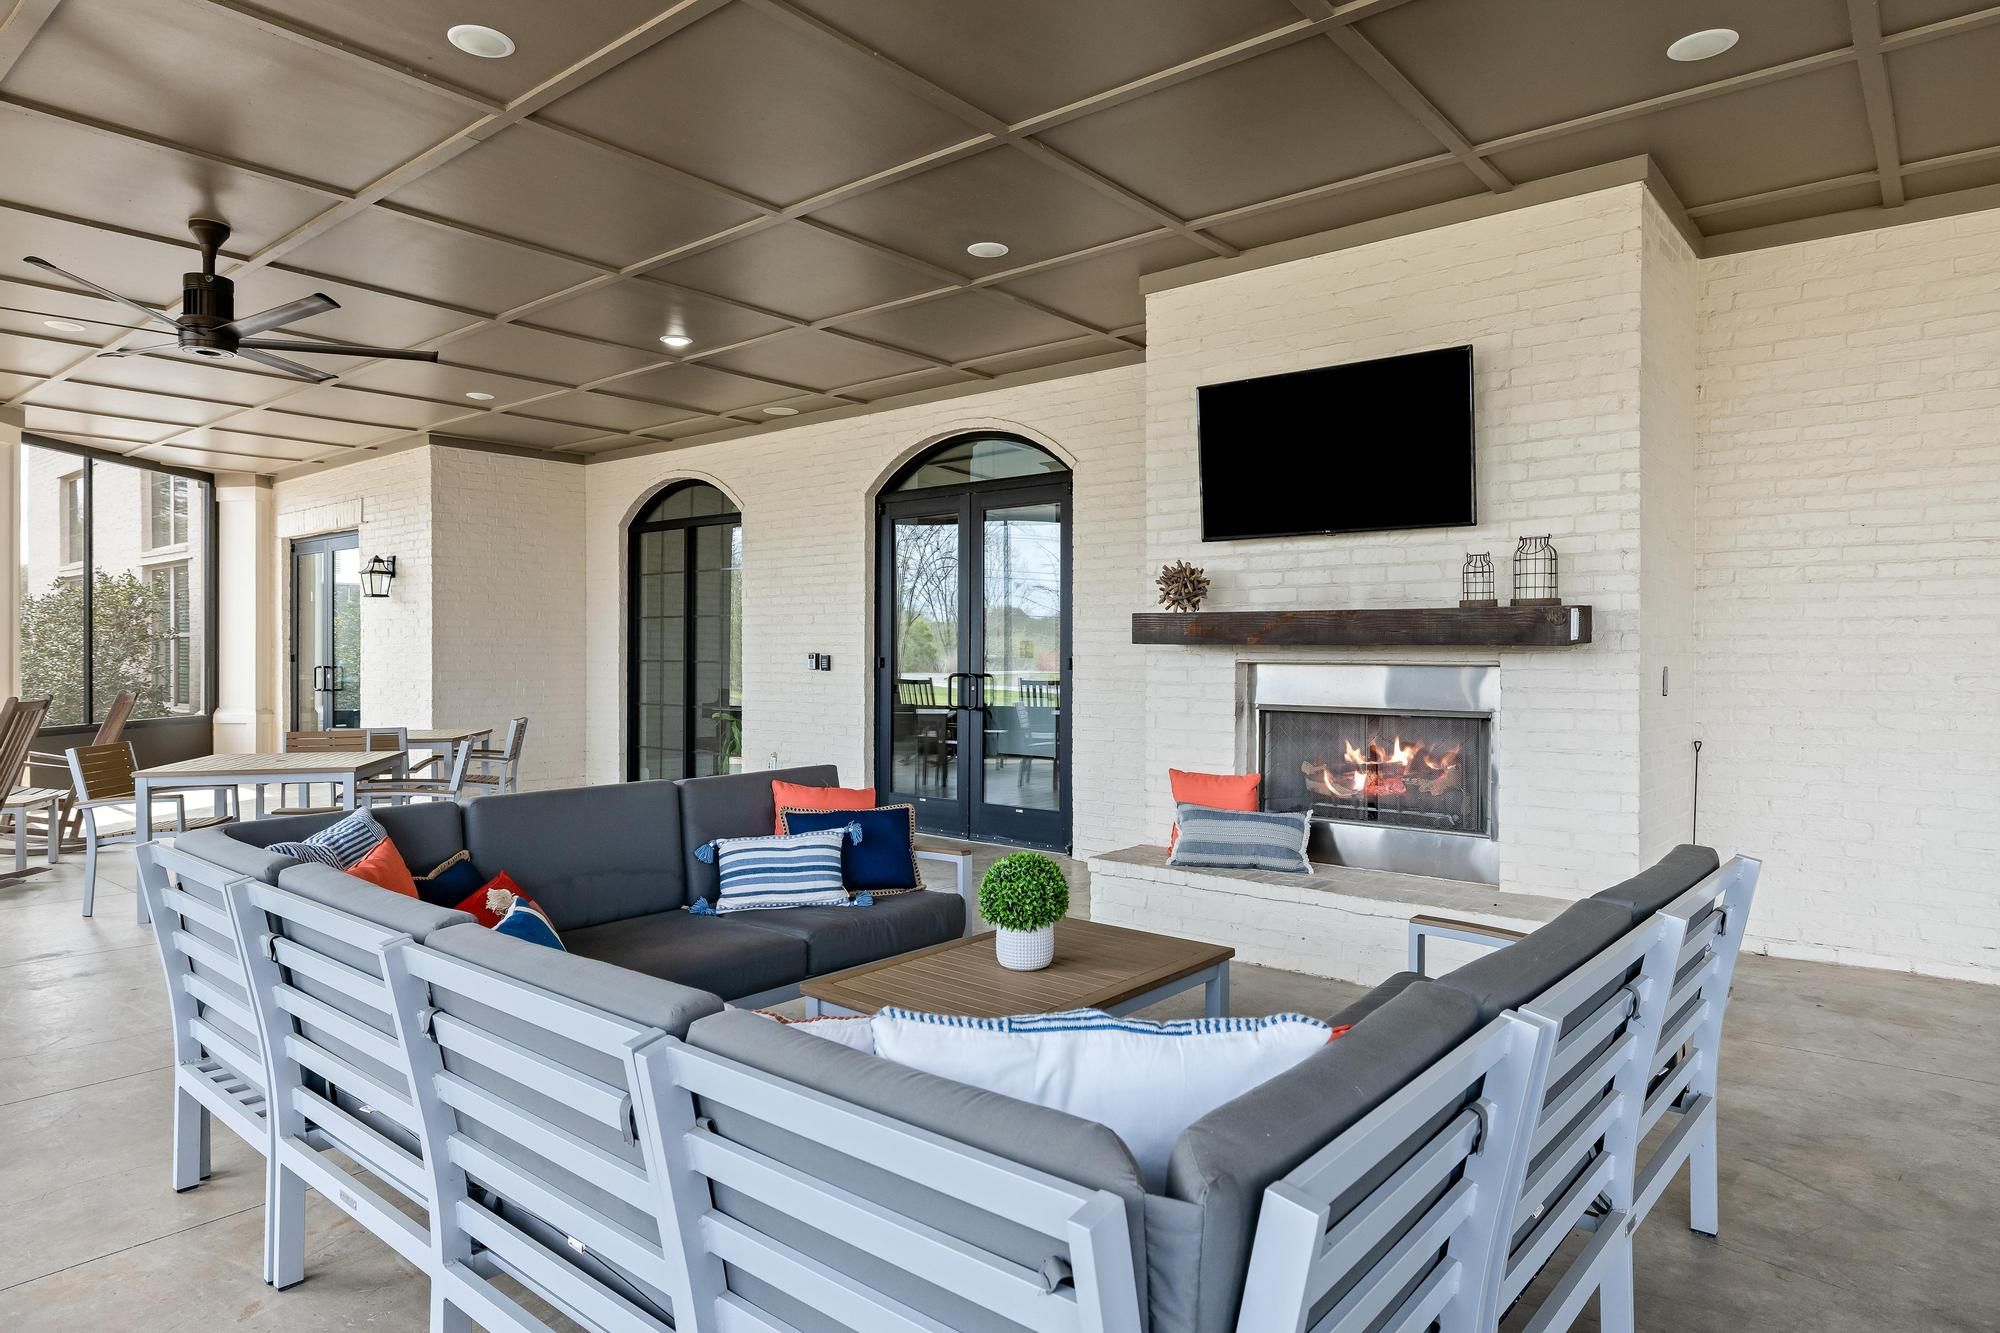 The Claiborne at Baton Rouge senior community outdoor patio with fireplace and lounge seating